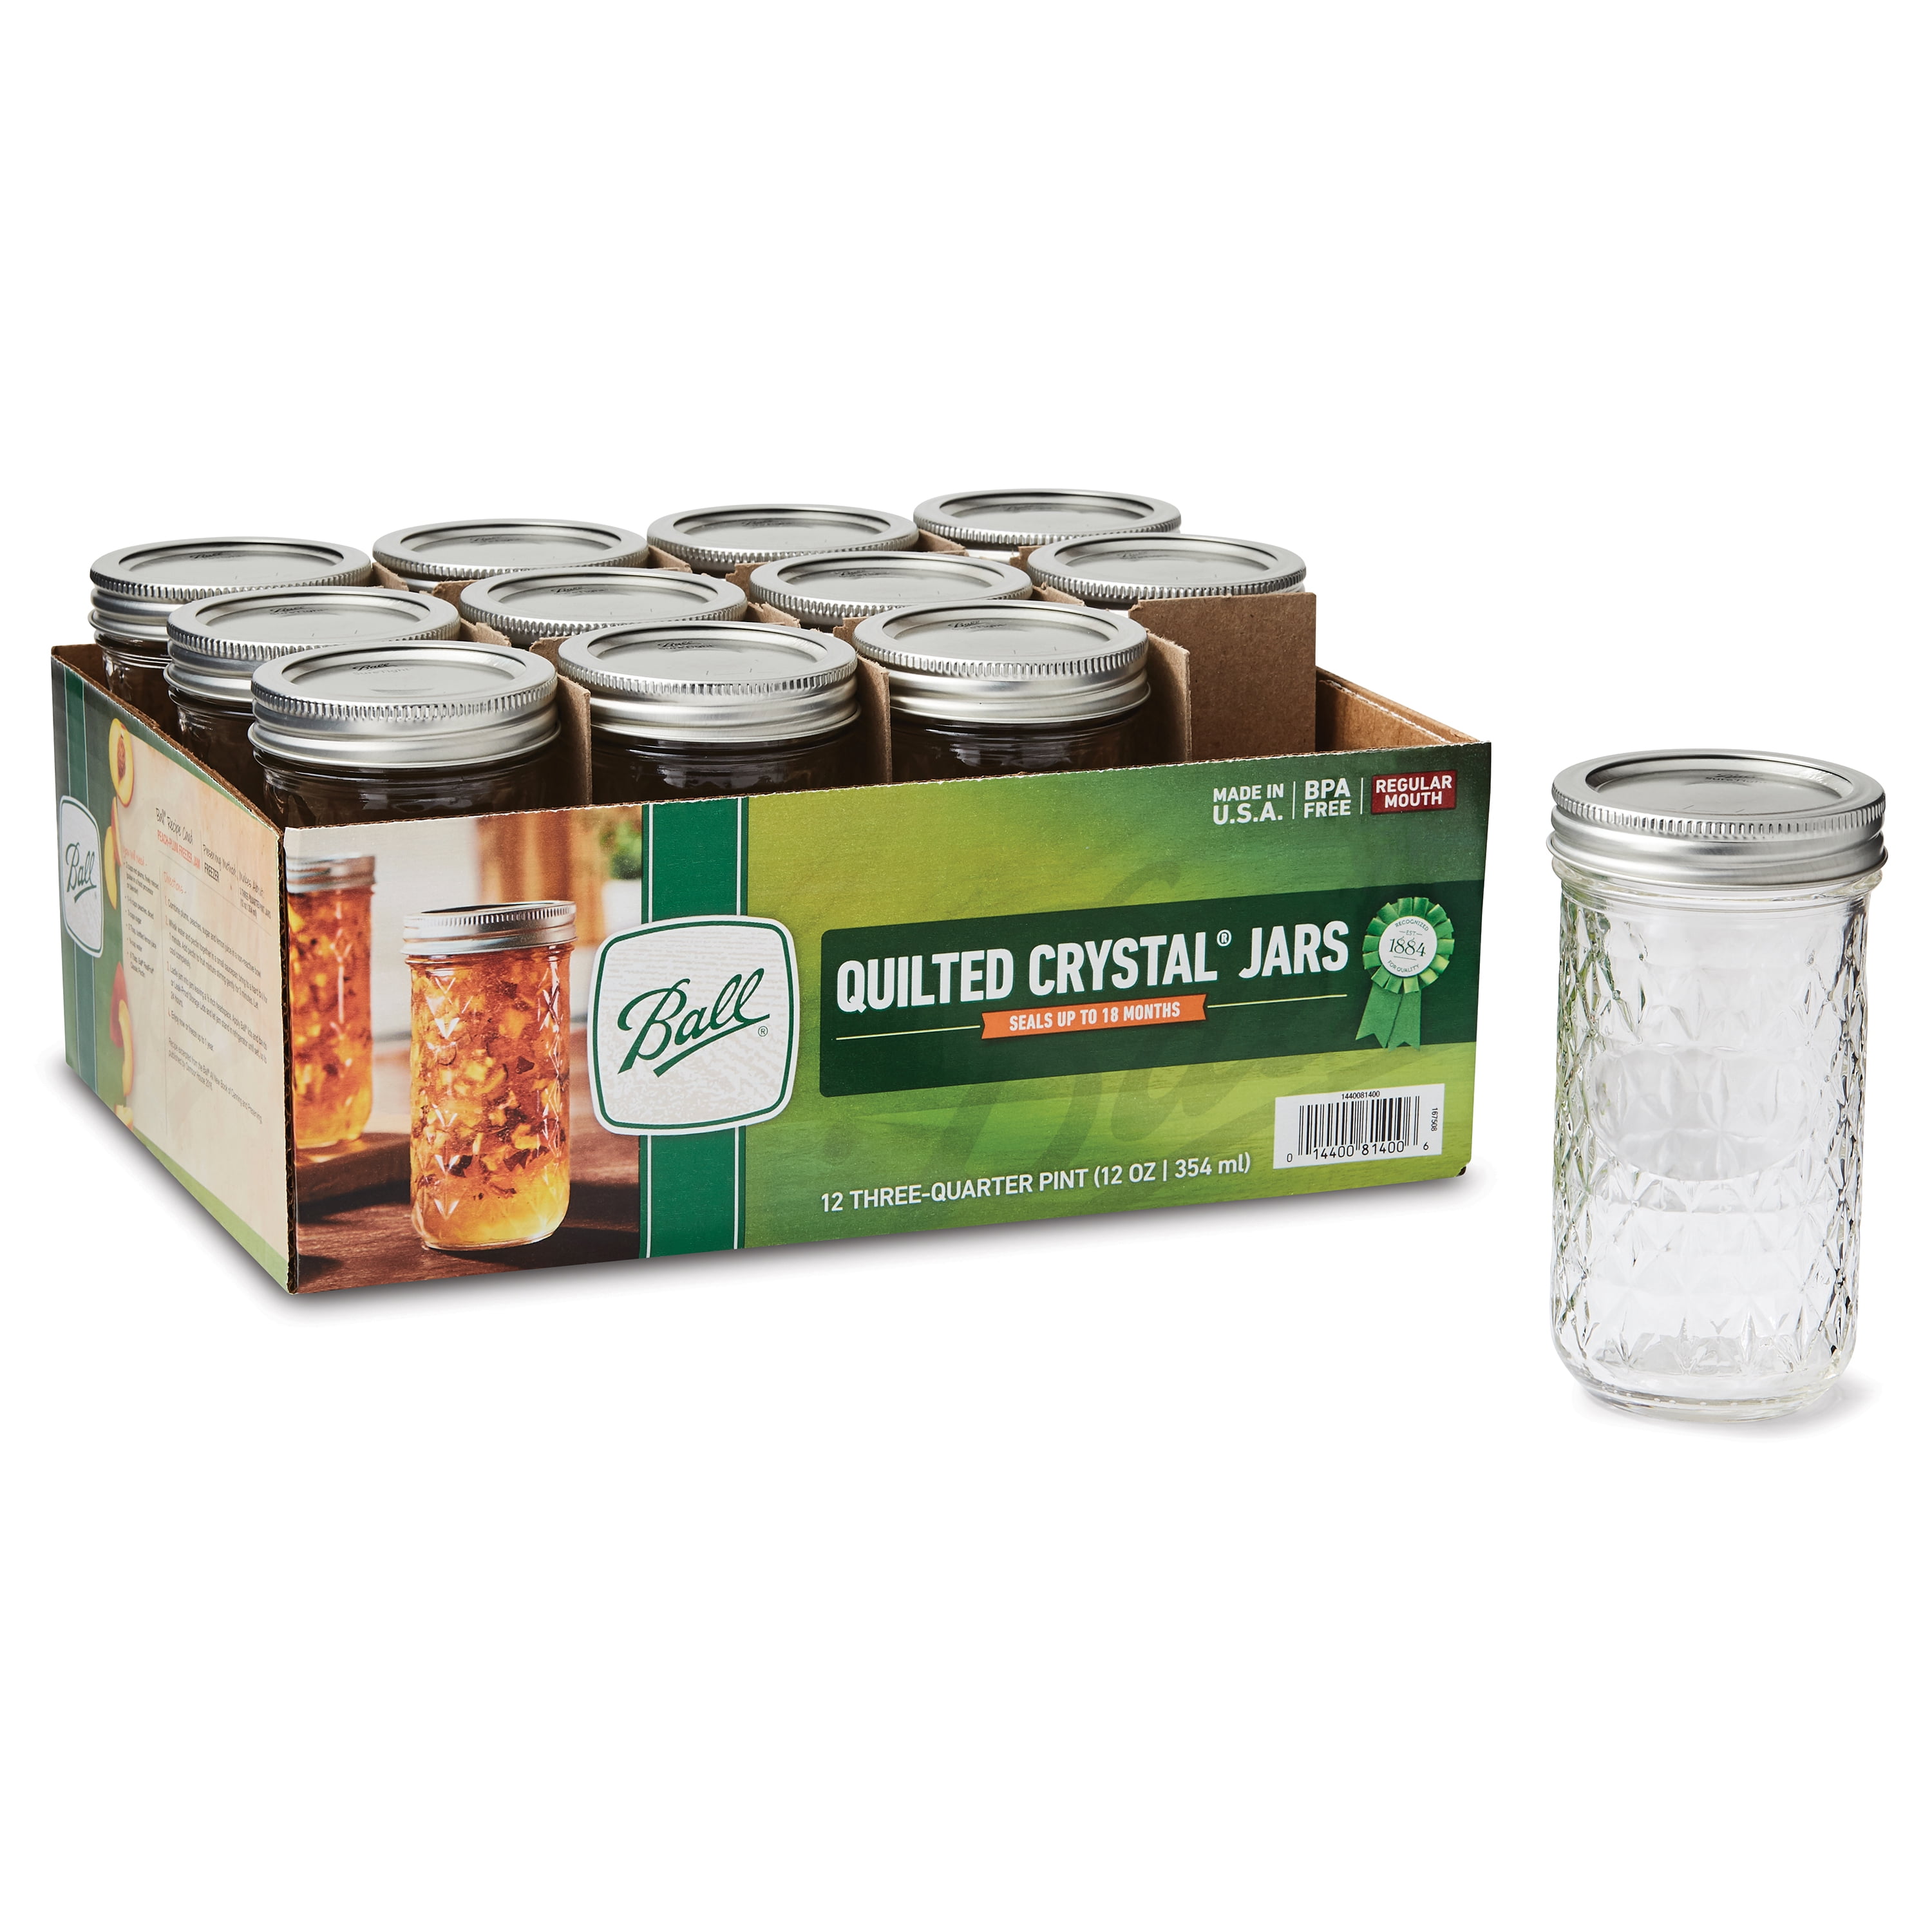 12 Count Ball Regular Mouth Quilted Crystal Jelly Jars with Lids and Bands .2 Case, Regular Mouth 12 oz 